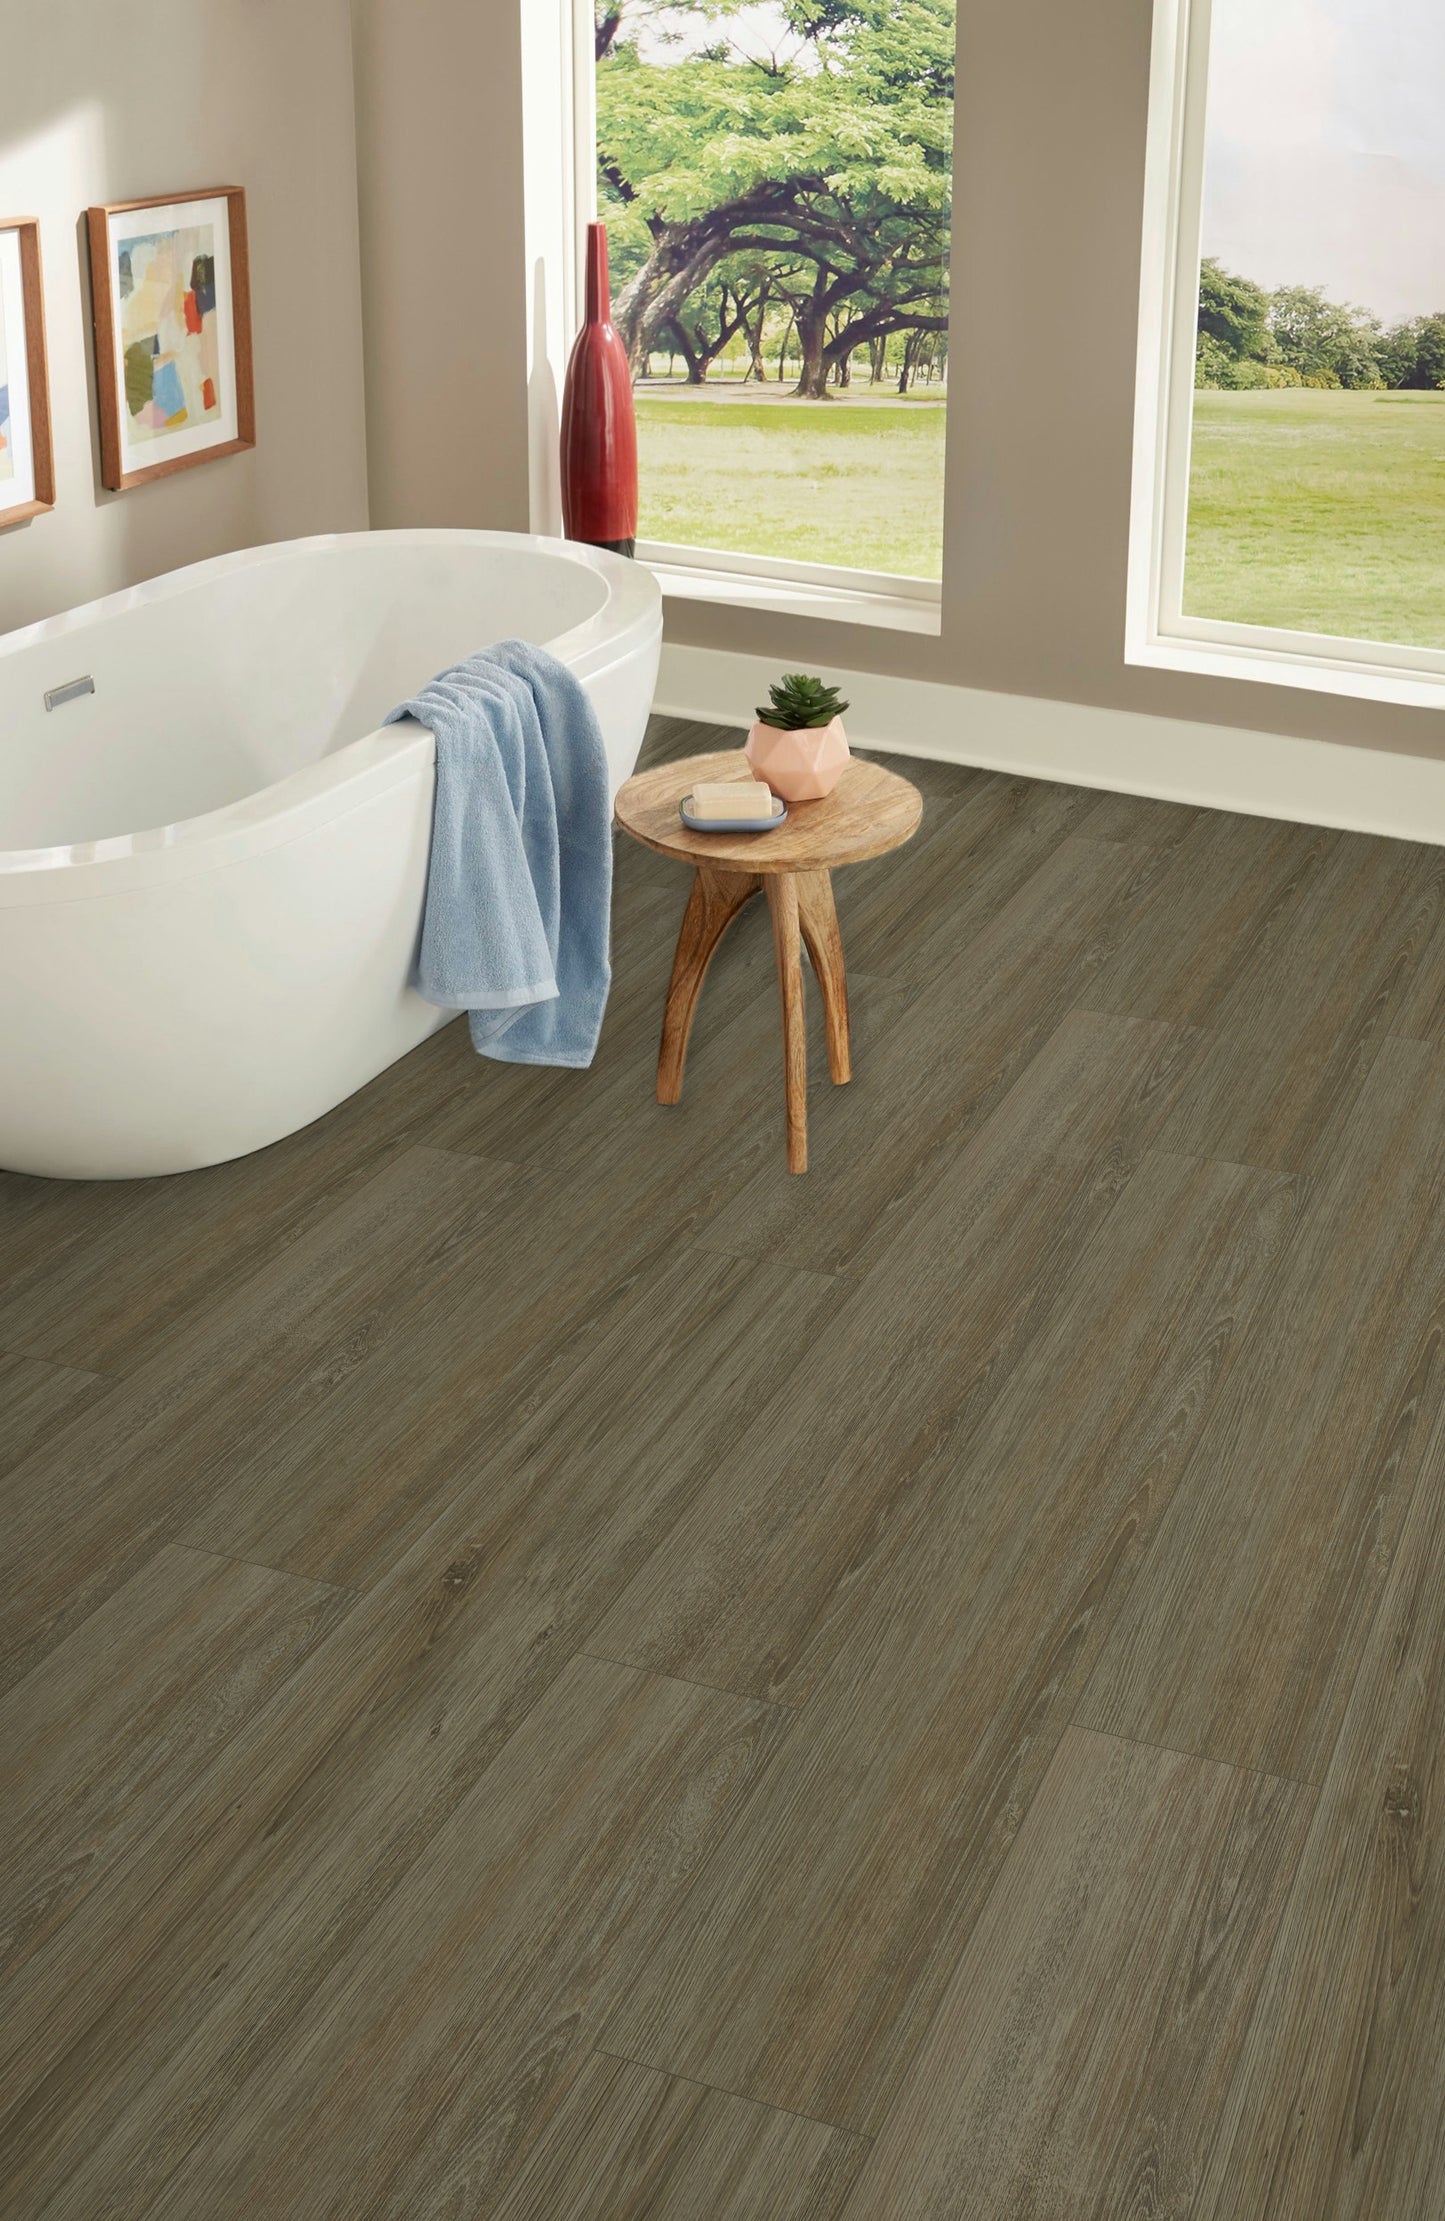 5mm Thick Rigid Core Vinyl Plank Flooring 9.13 in. Width x 60 in. Length (32.81 sq. ft. per box) - Lake House